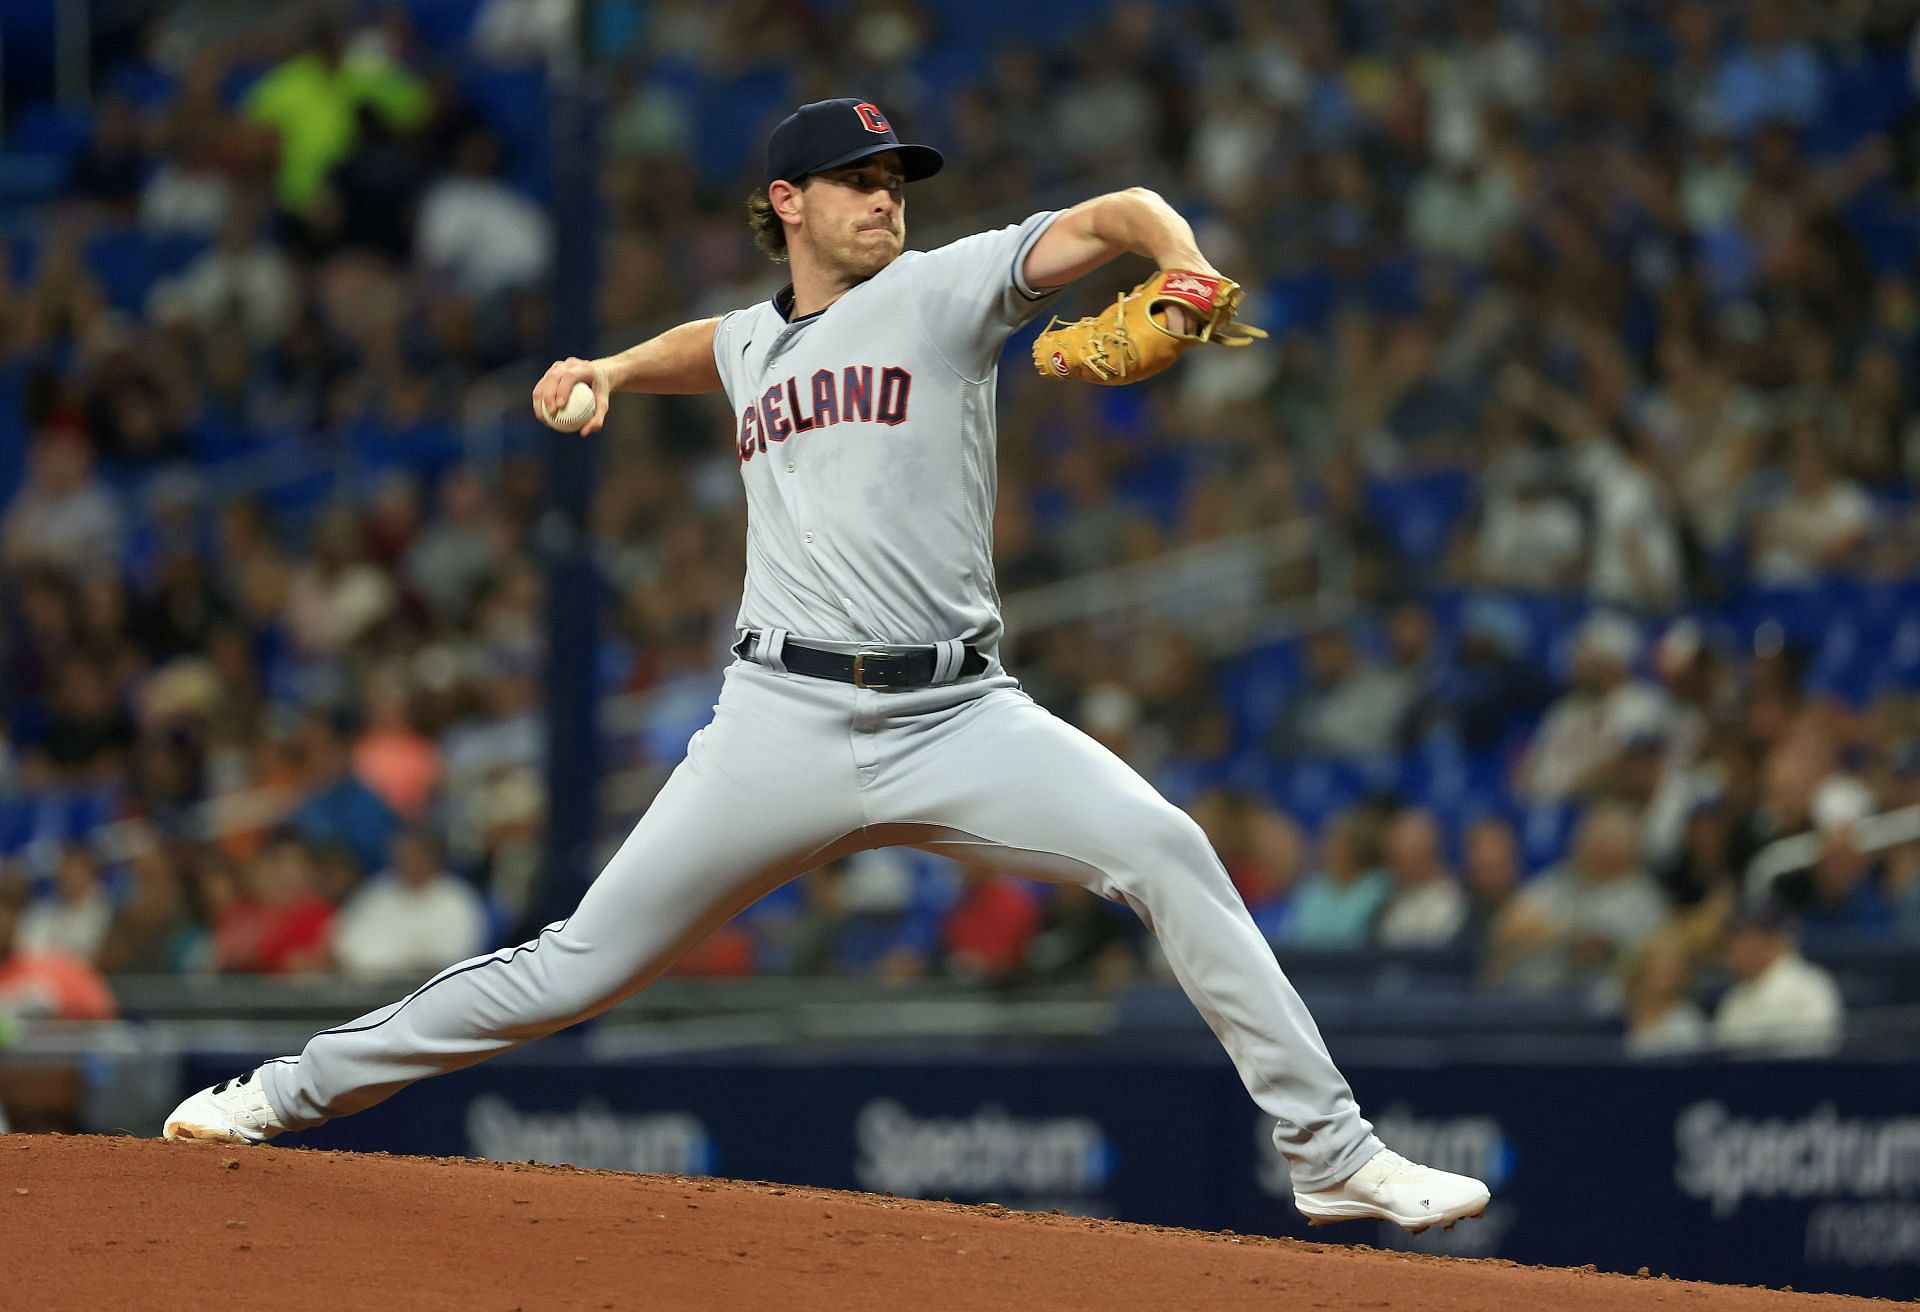 Shane Bieber of the Guardians in a game versus the Tampa Bay Rays.